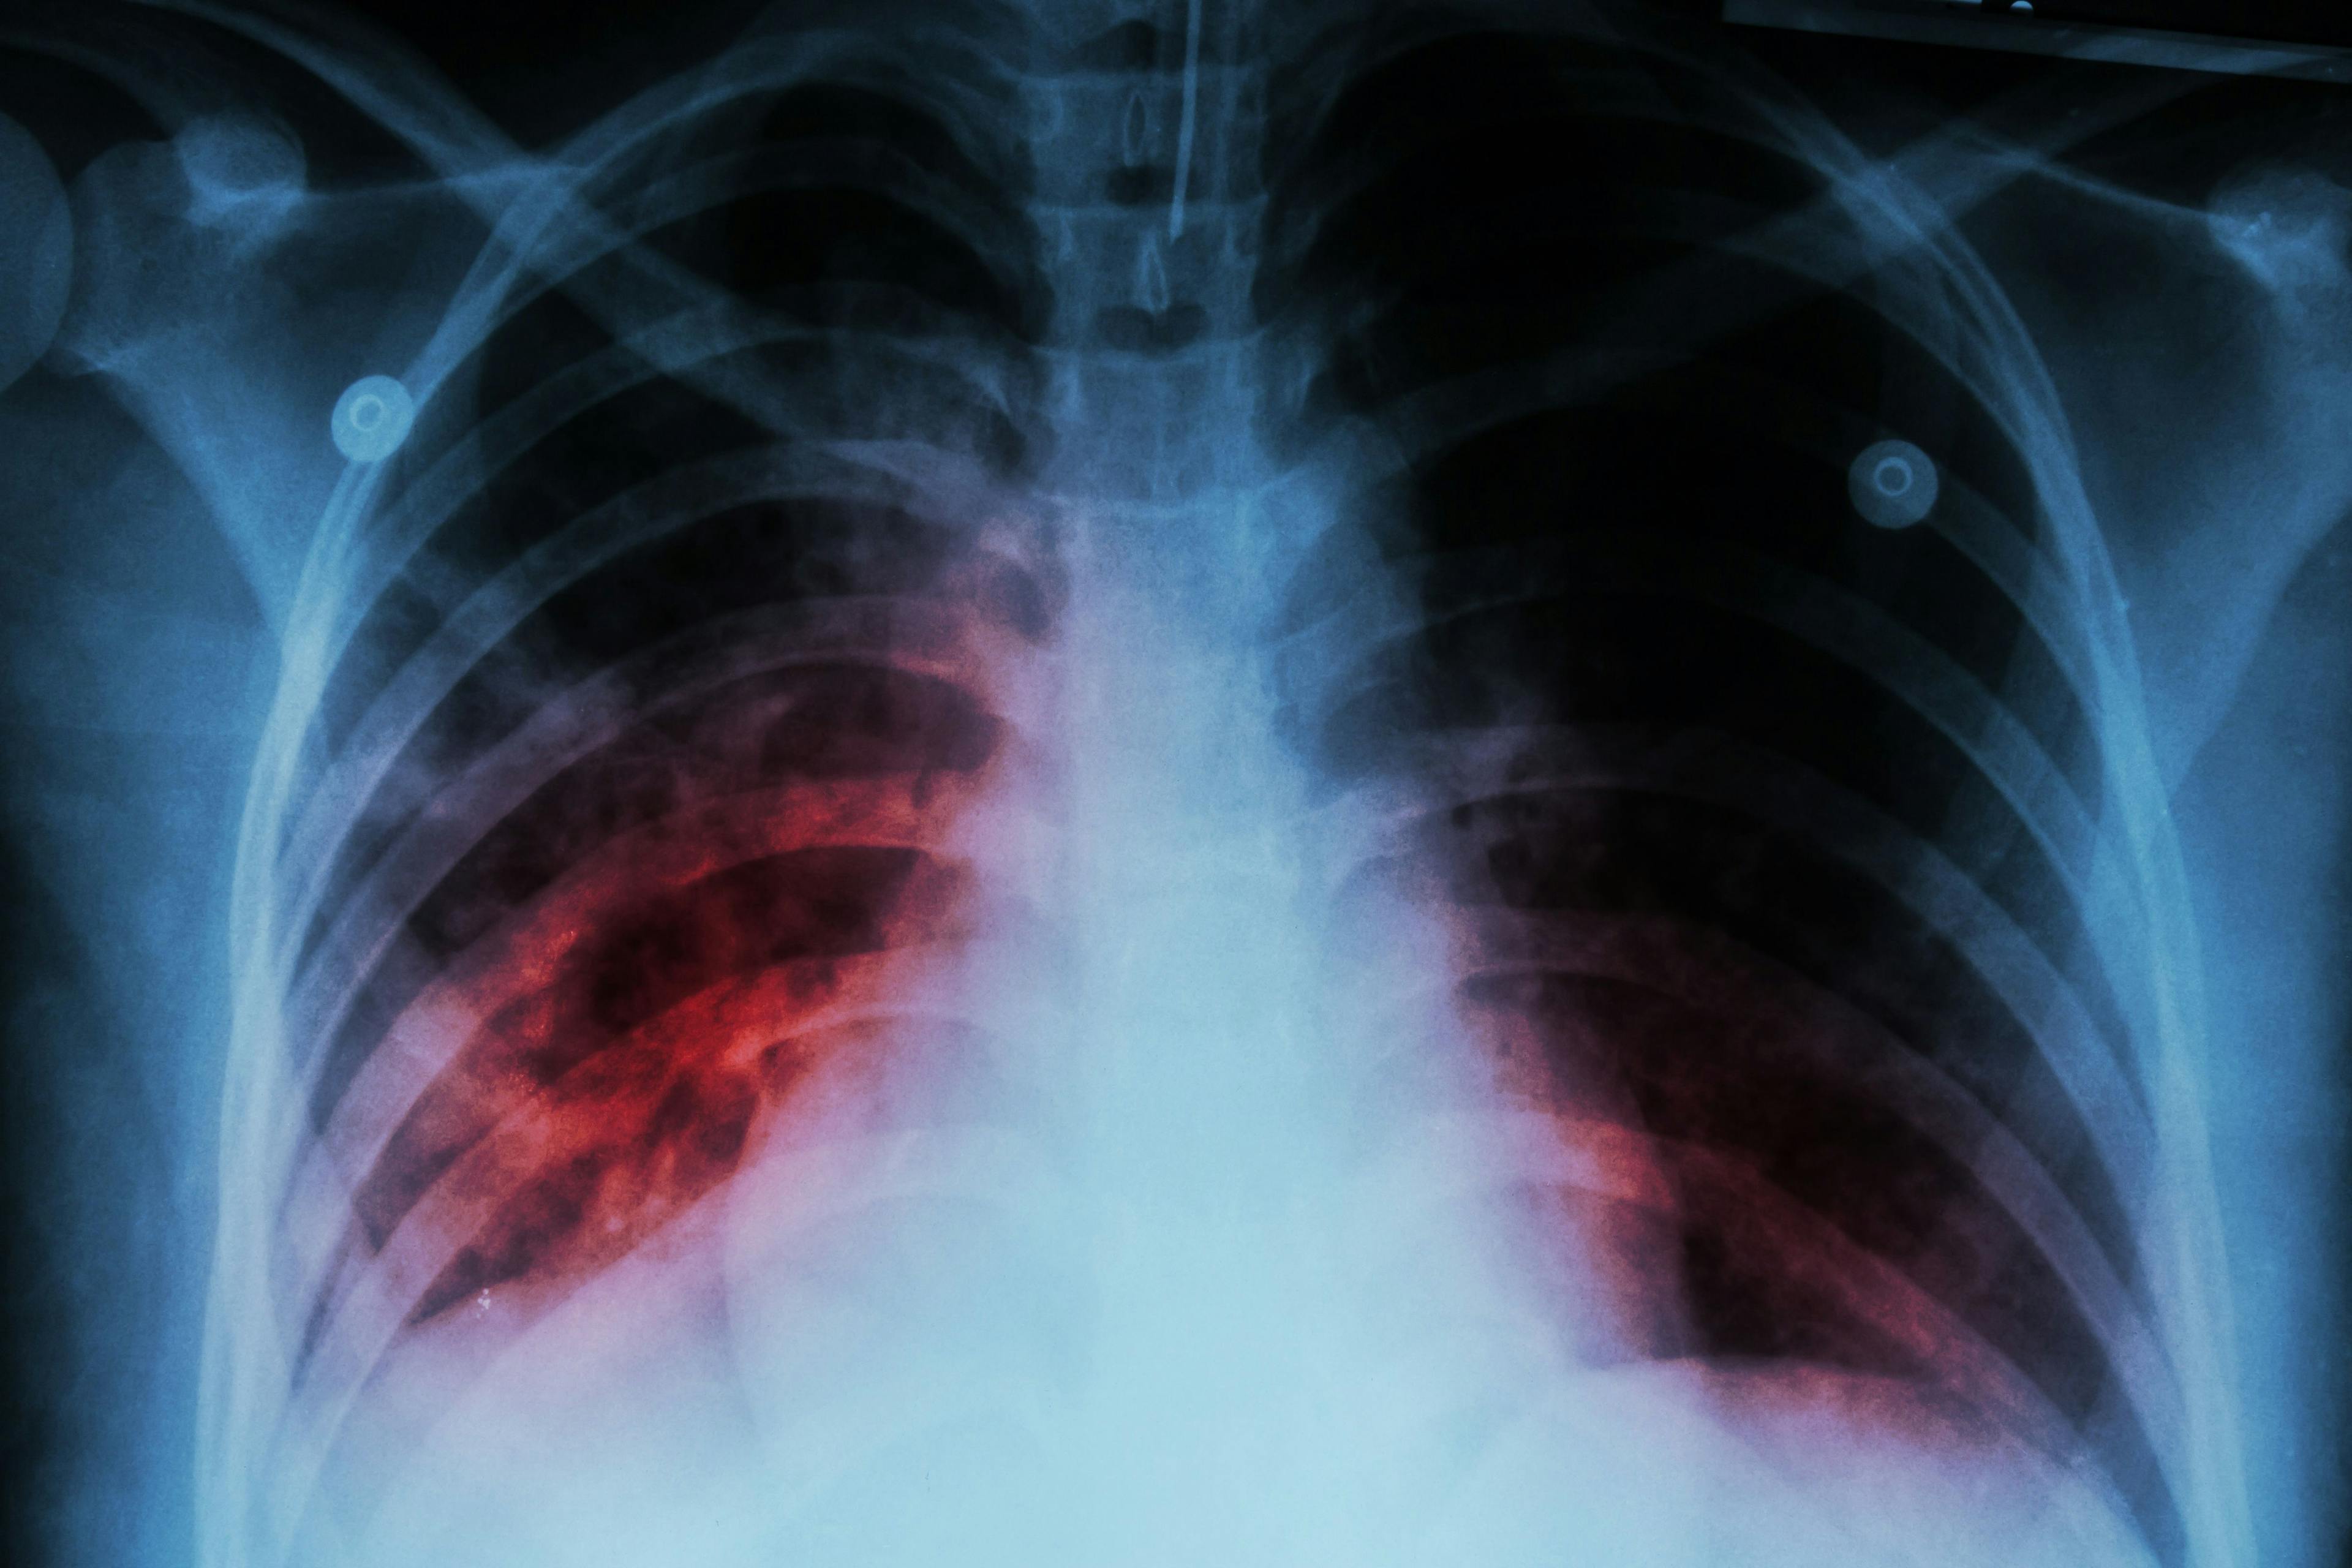 Pneumonia and Tuberculosis Rates Higher In Individuals Who Used Inhaled Corticosteroids